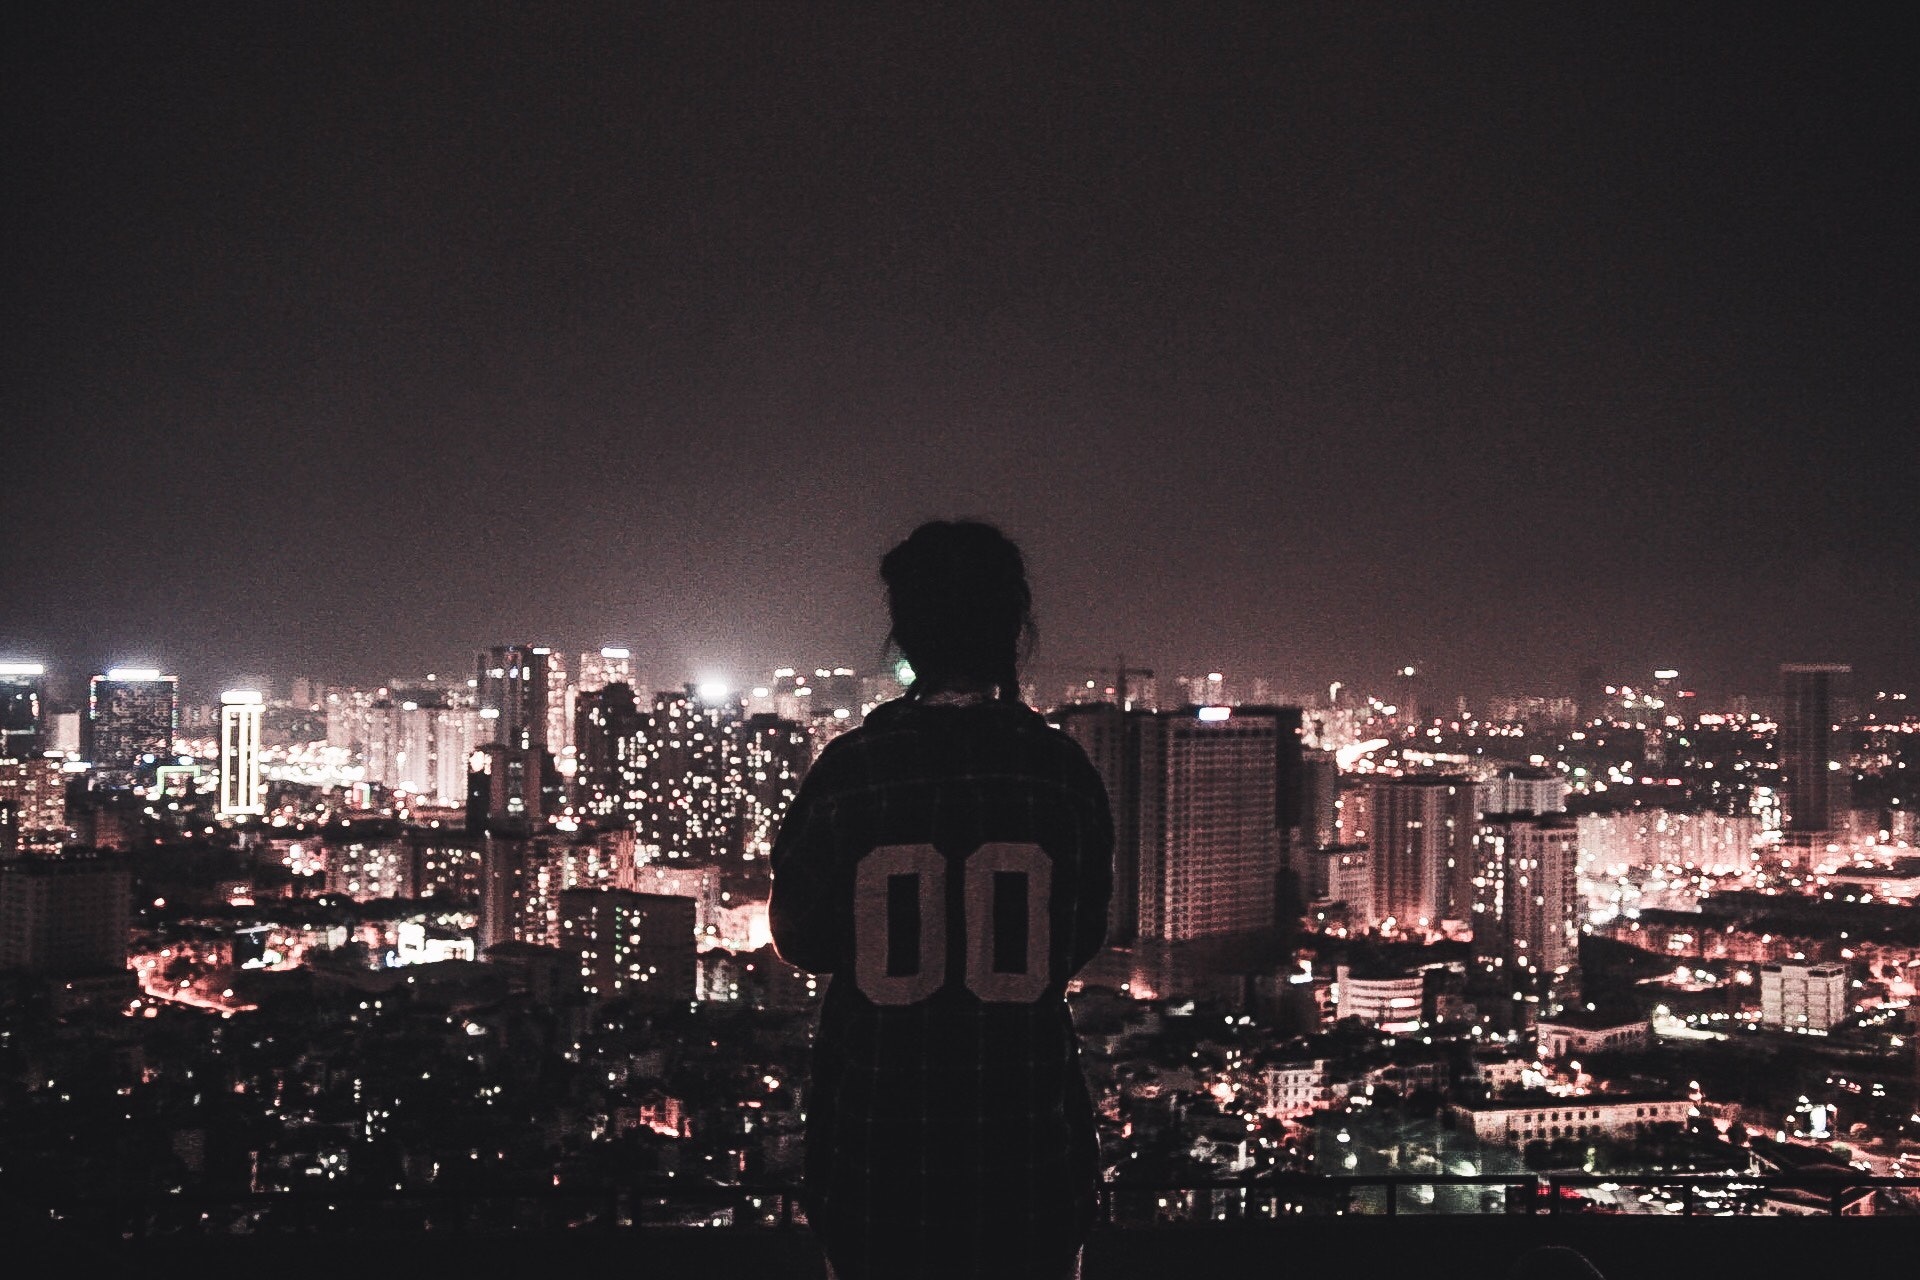 Photo of a person watching over city lights during night time